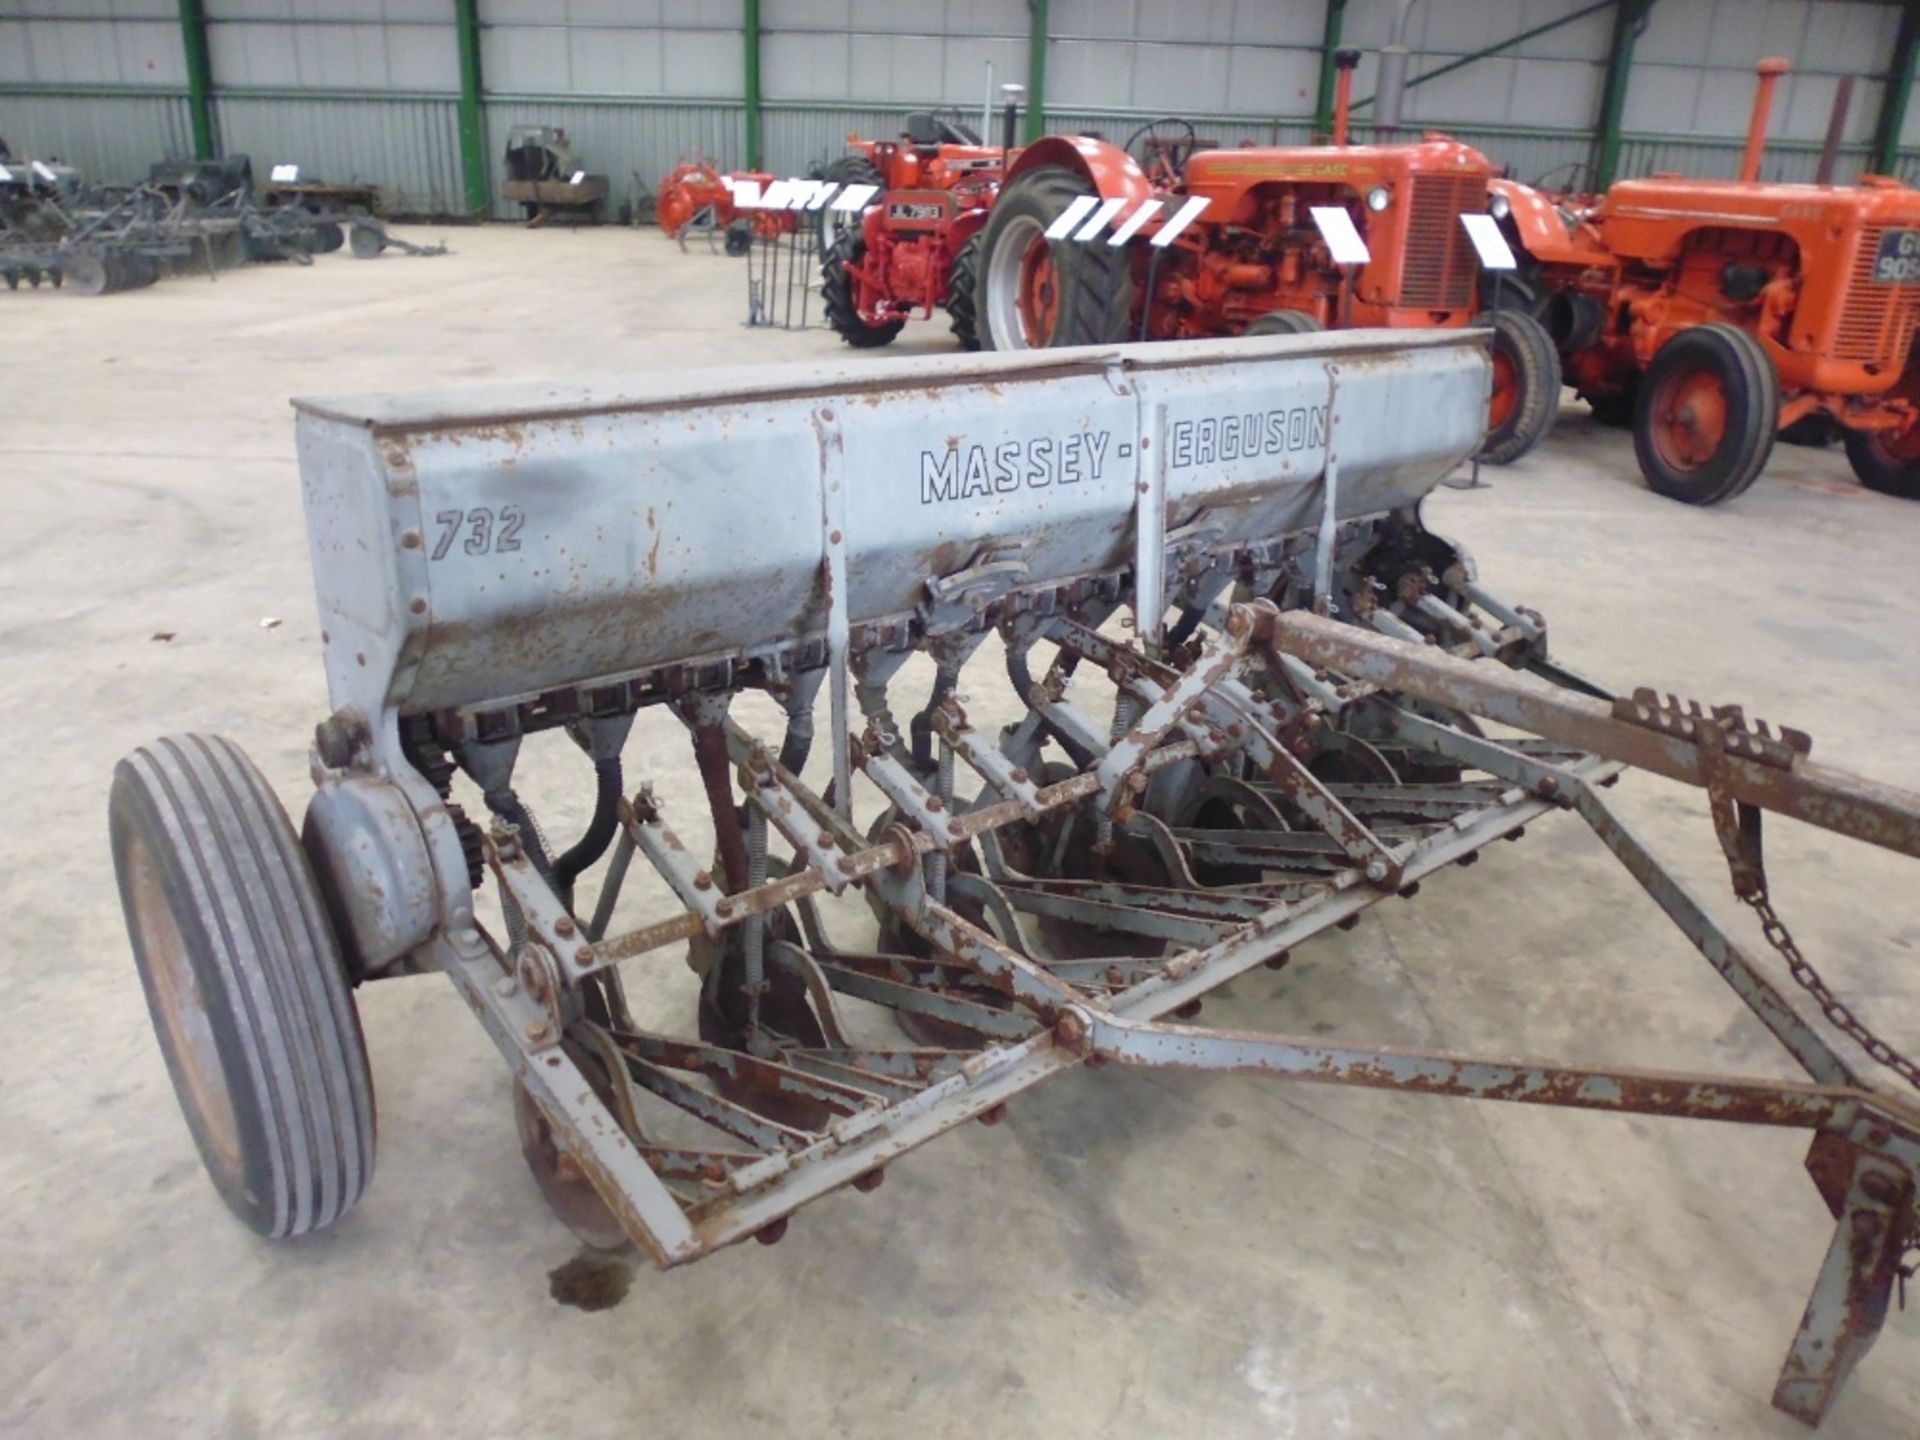 Massey Ferguson 13row trailed coulter seed drill, Model 732 Sn.A9651 - Image 3 of 4